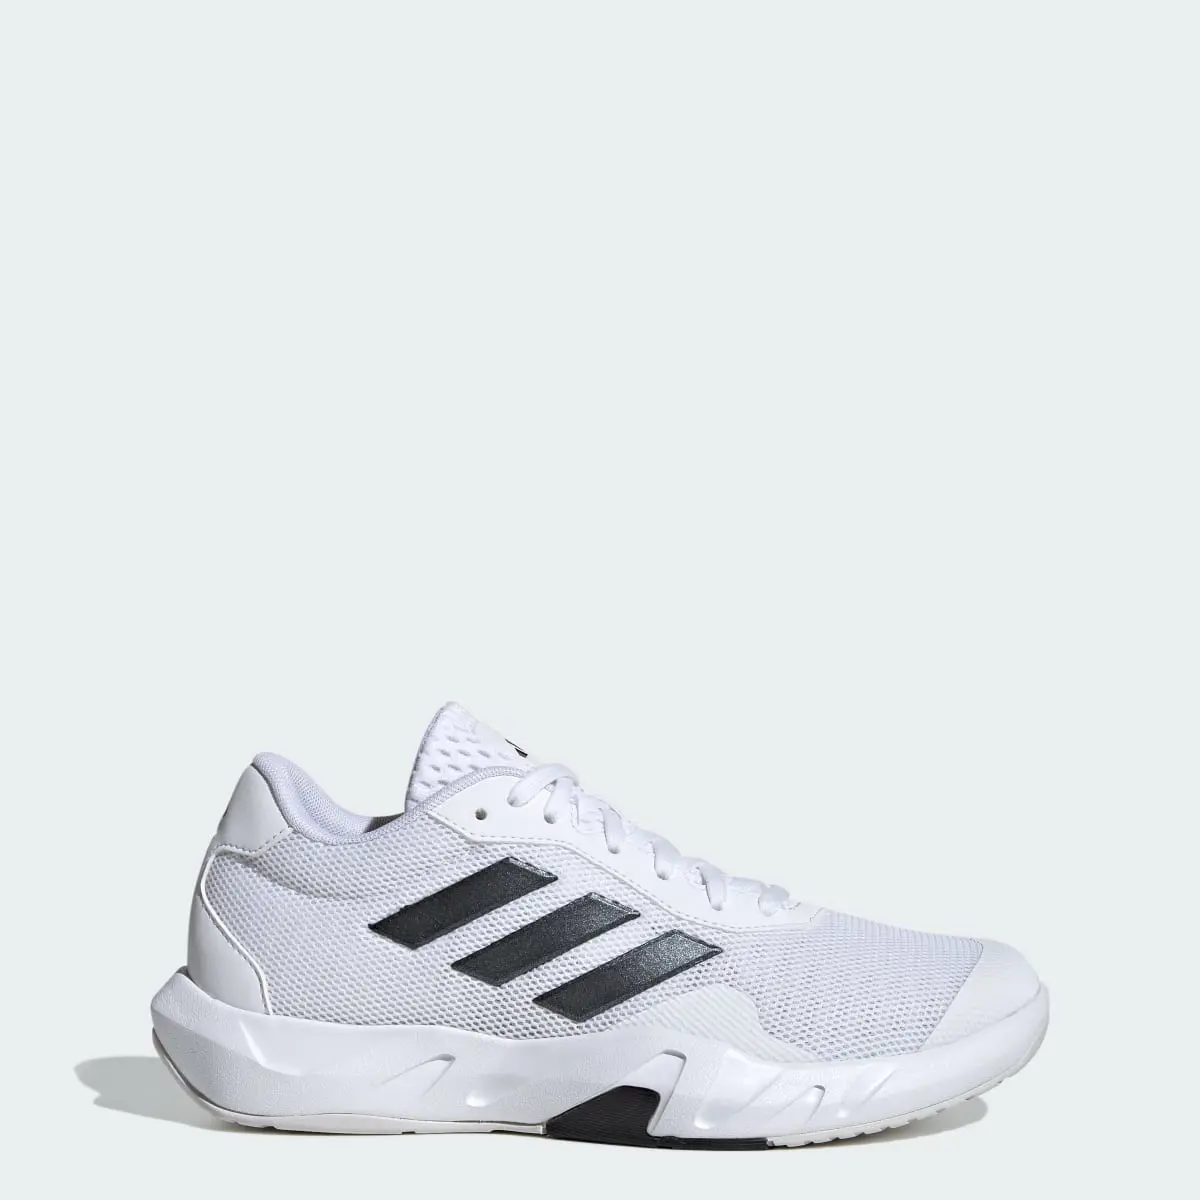 Adidas Amplimove Trainer Shoes. 1